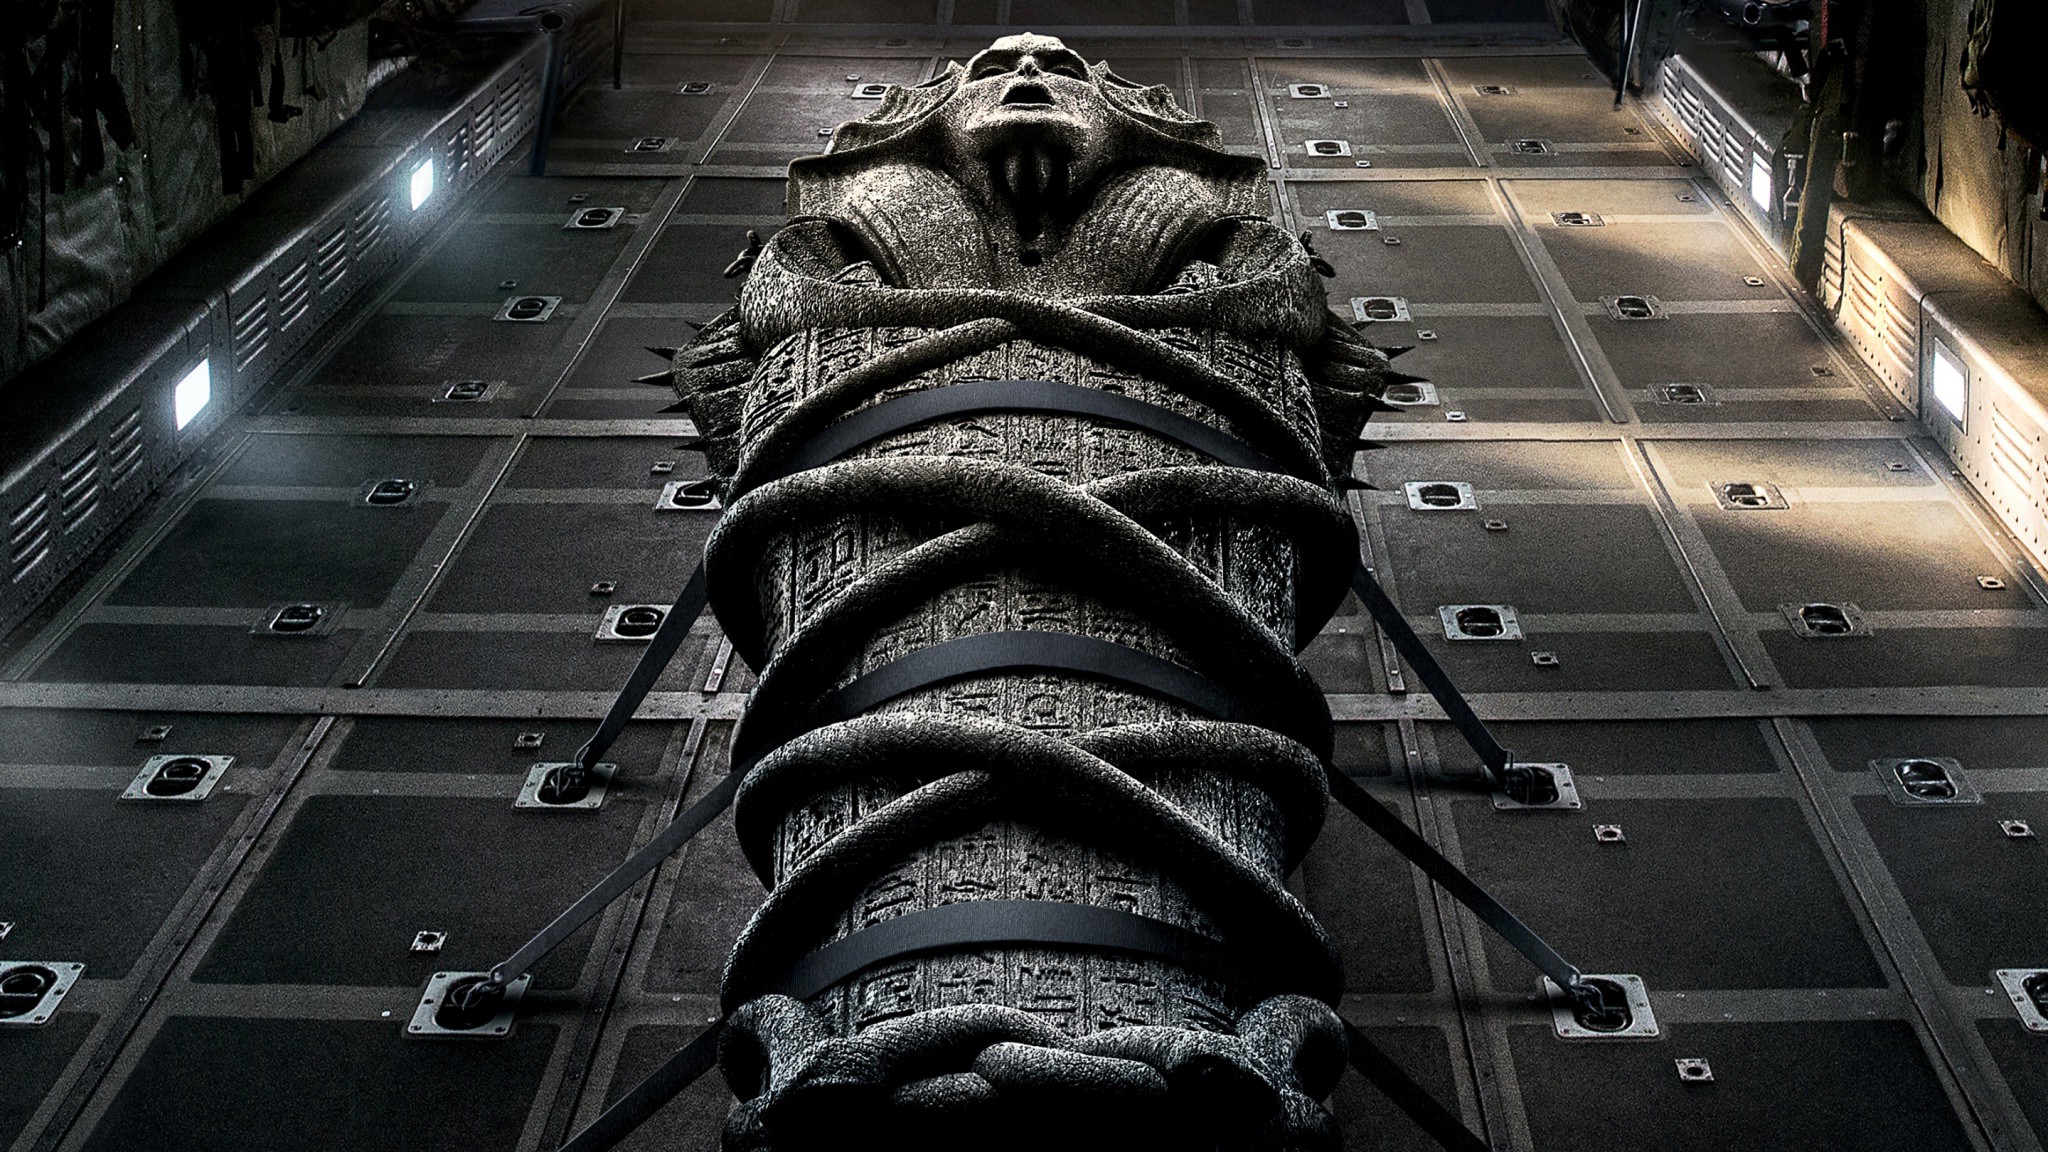 These five movies like The Mummy prove that some tombs are better left unopened! Check them out for a little action, adventure and even a bit of campiness!